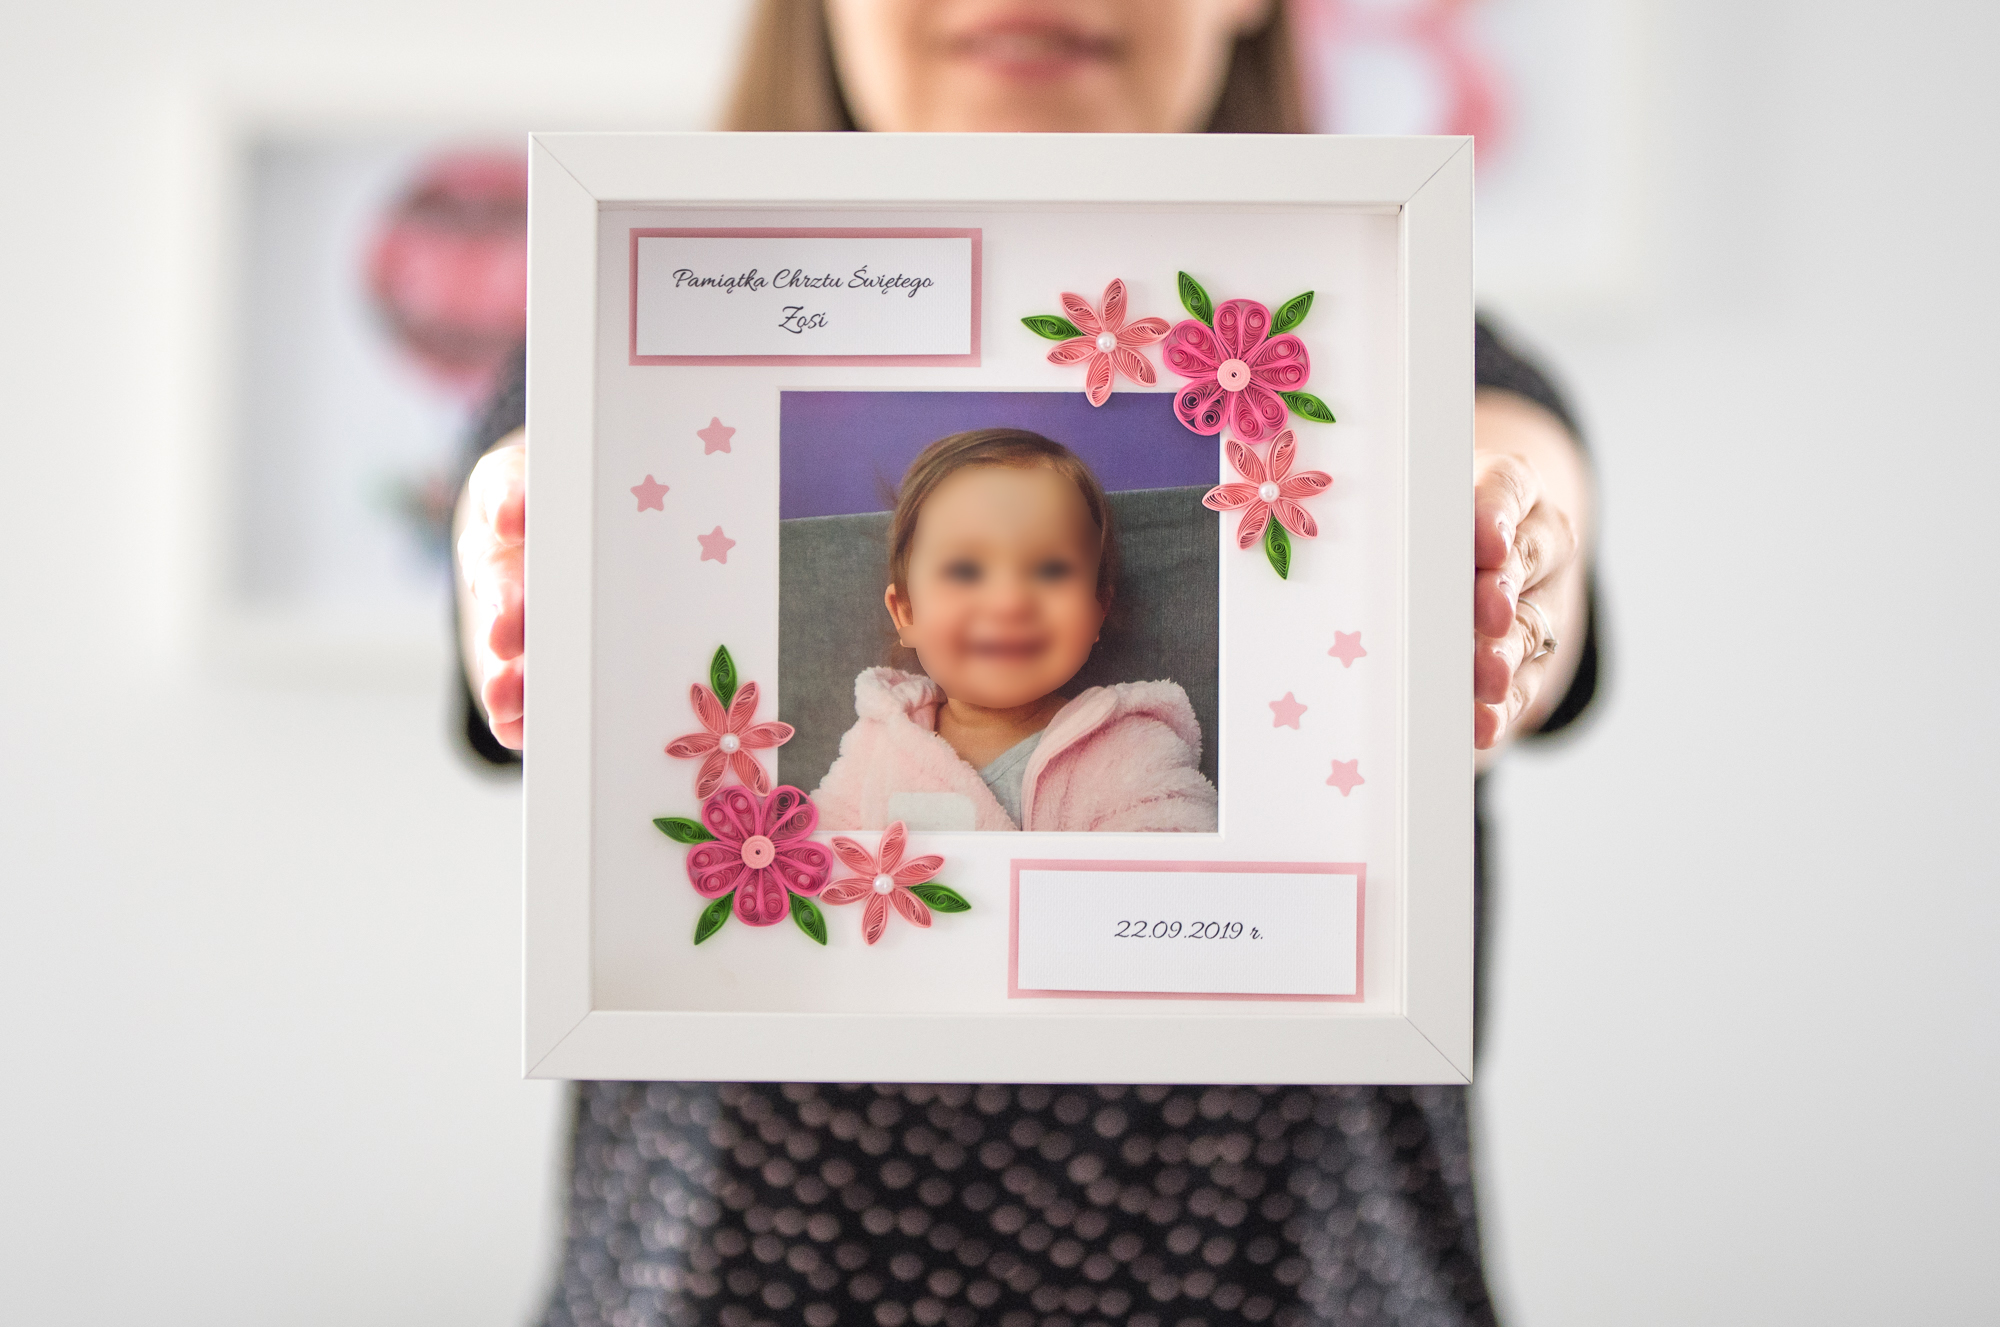 You are currently viewing Handmade Nursery Wall Decor – Decorative Baby Photo Frame